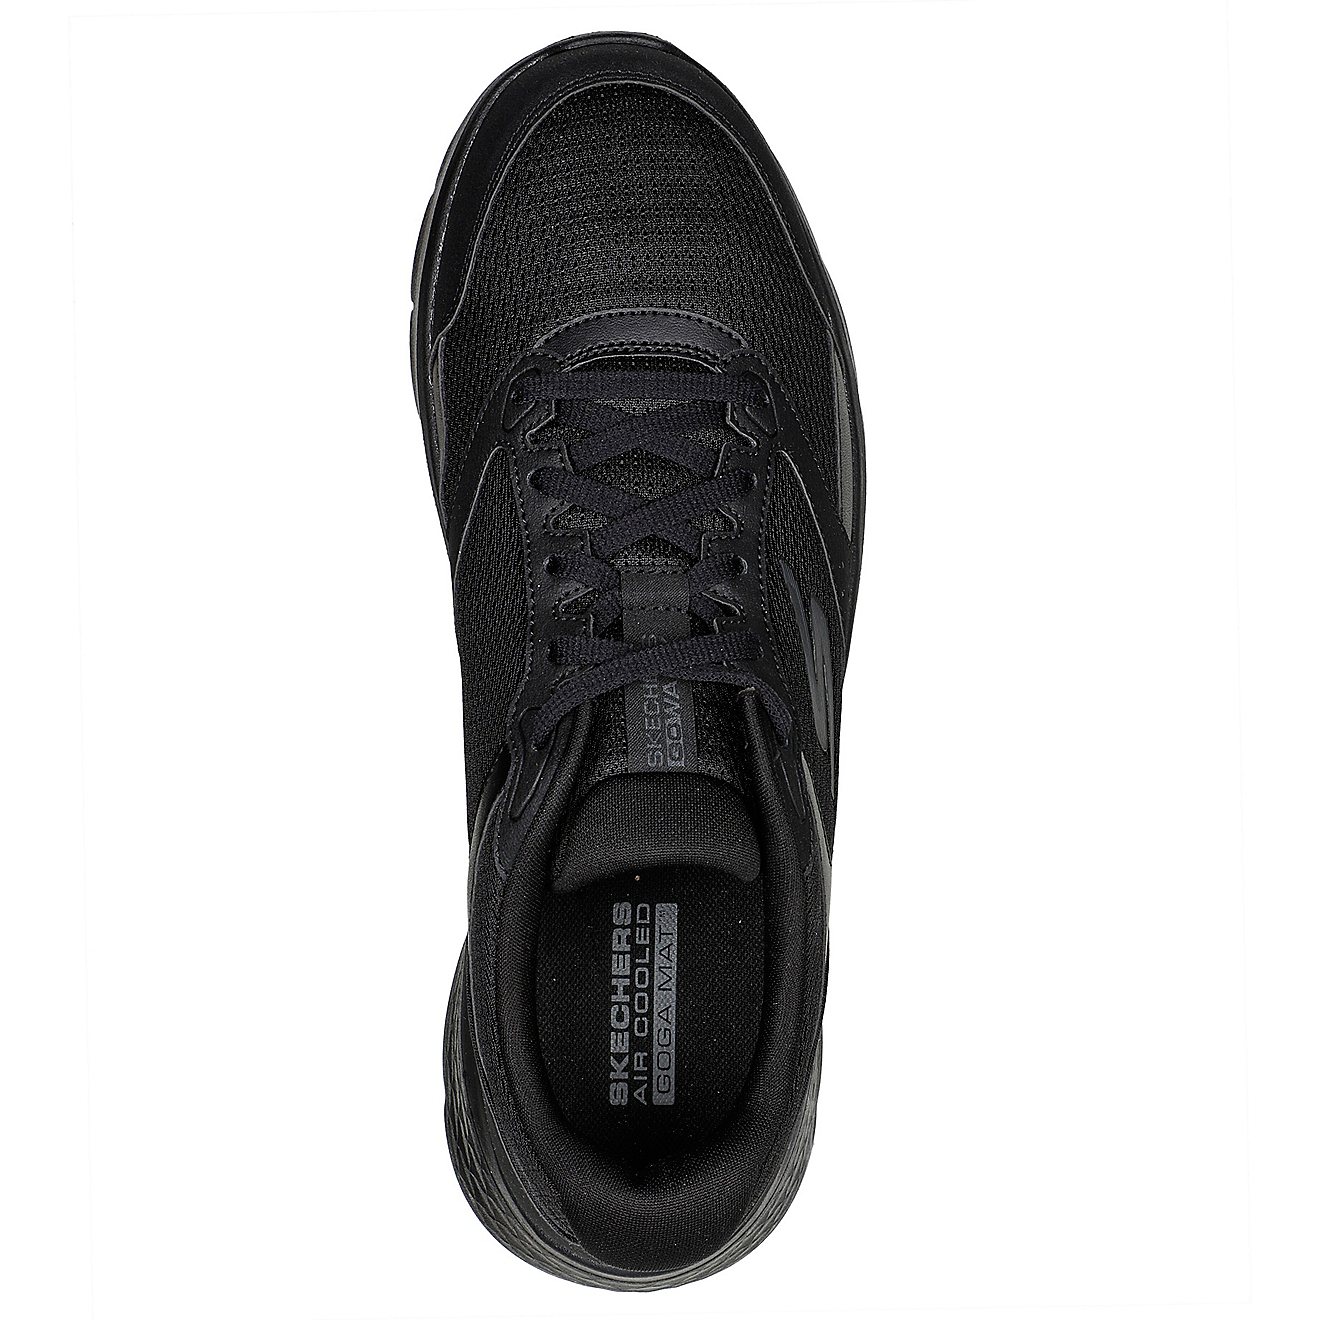 SKECHERS Men's Go Walk Flex Shoes | Free Shipping at Academy